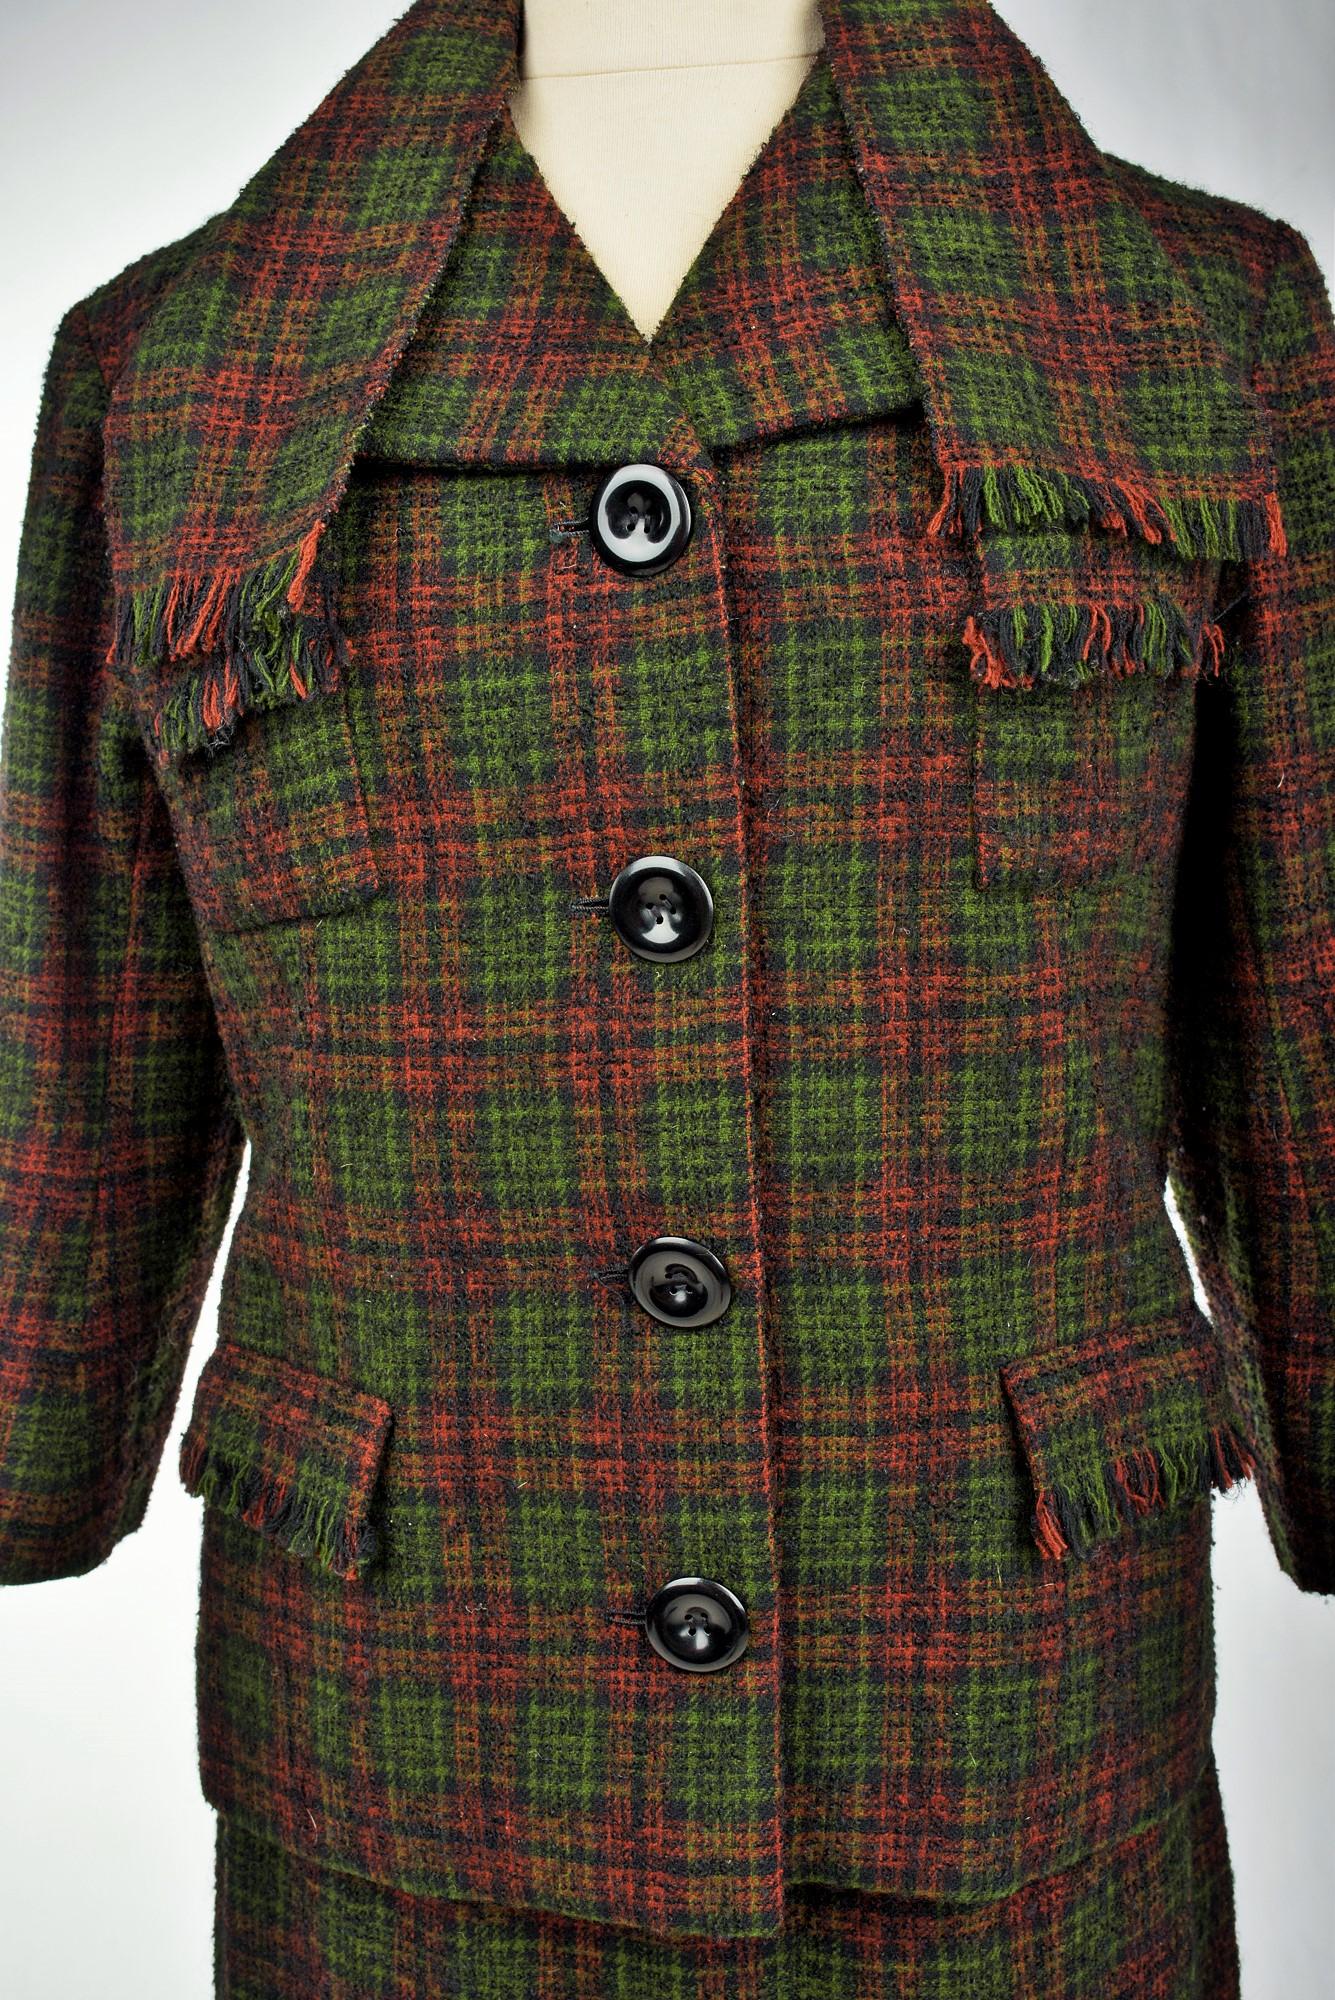 Circa 1970
France

Tartan plaid curly wool suit labelled Berenice which belongs to a series of Christian Dior patterns, made by this Marseilles-based House and dating from the 1970s. Fitted jacket with fringed shawl collar integrated to tie with